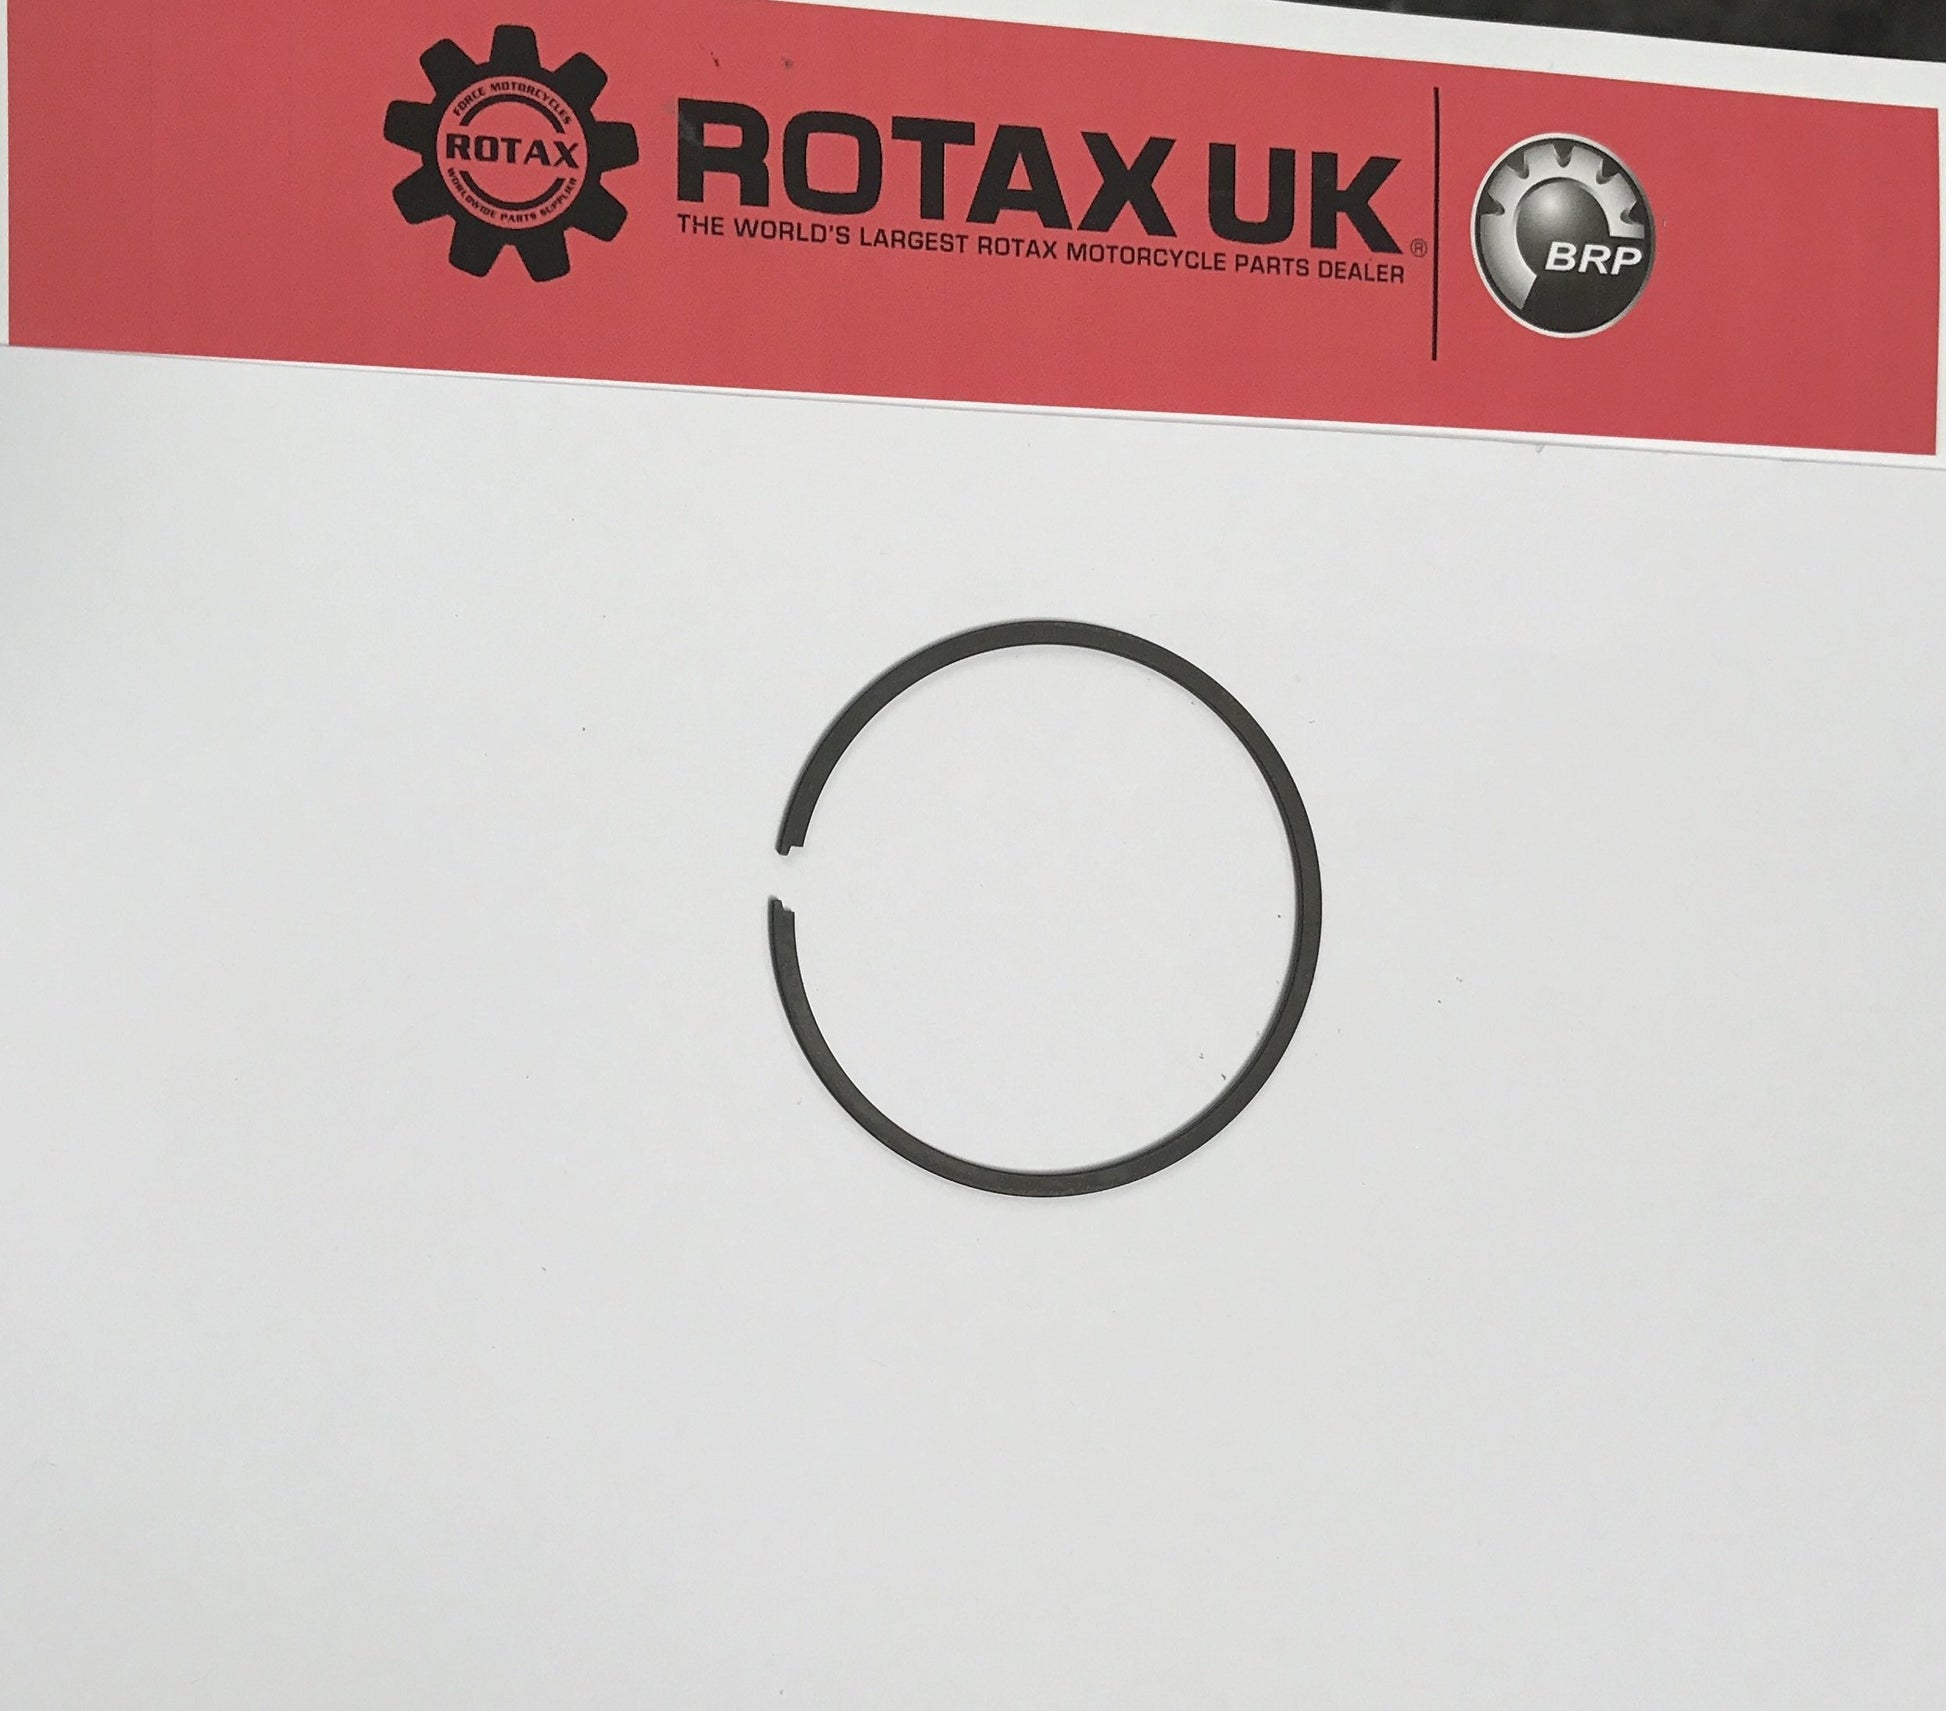 215186 - 62.25mm Piston Ring for various Rotax engine types.